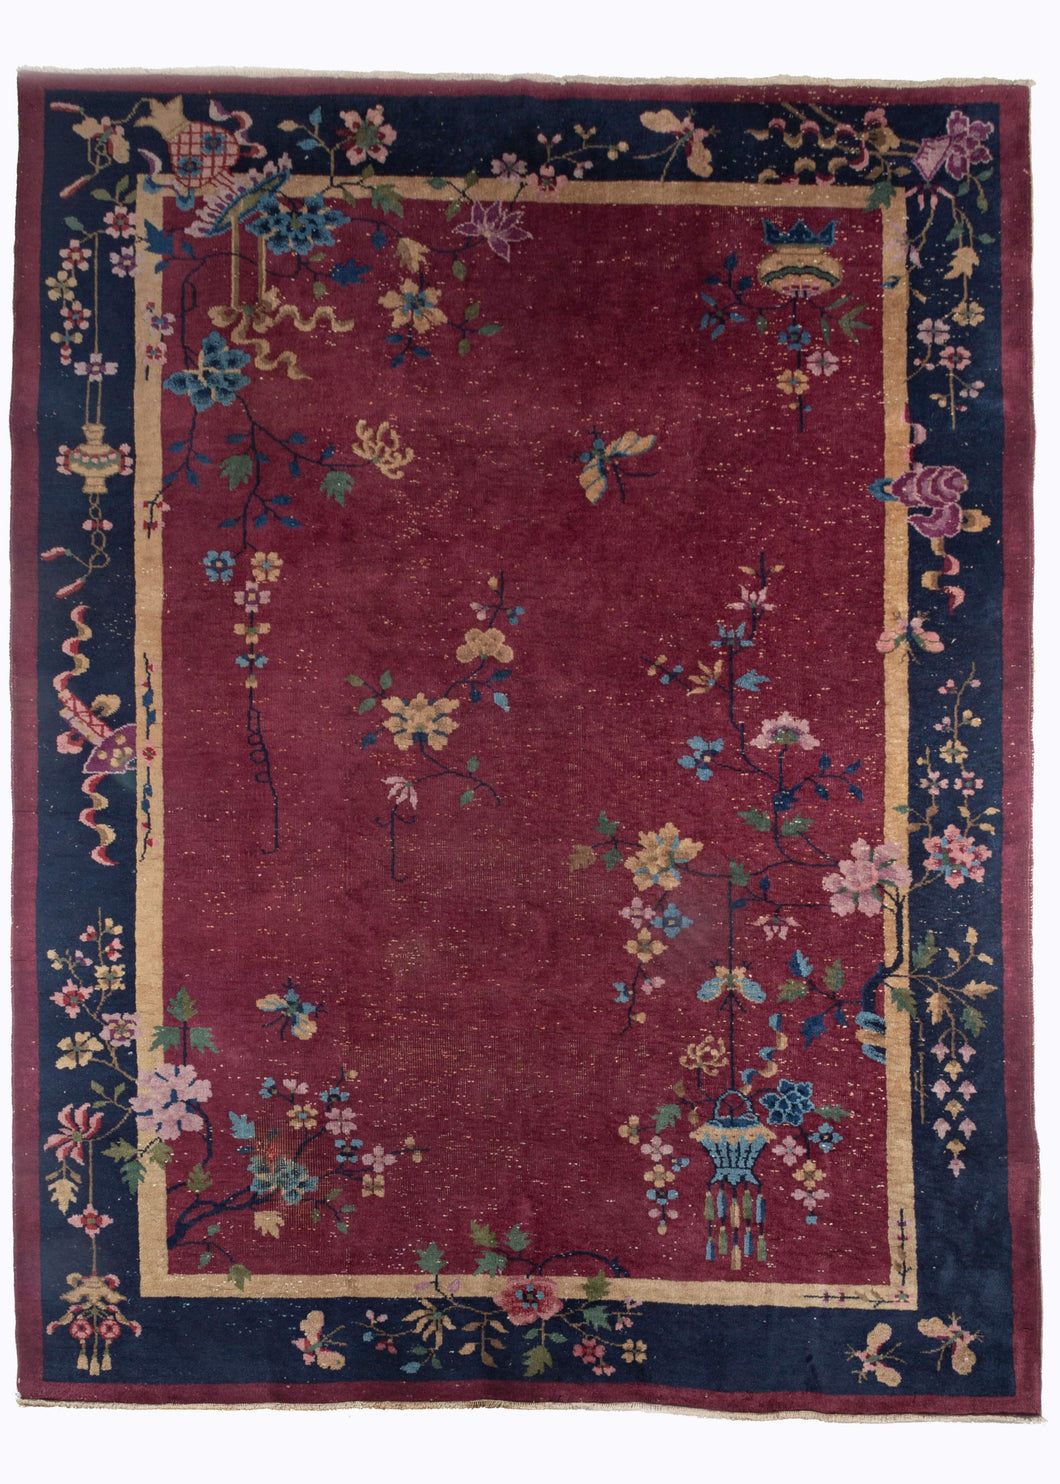 Chinese Art Deco Rug with deep blue border and maroon field